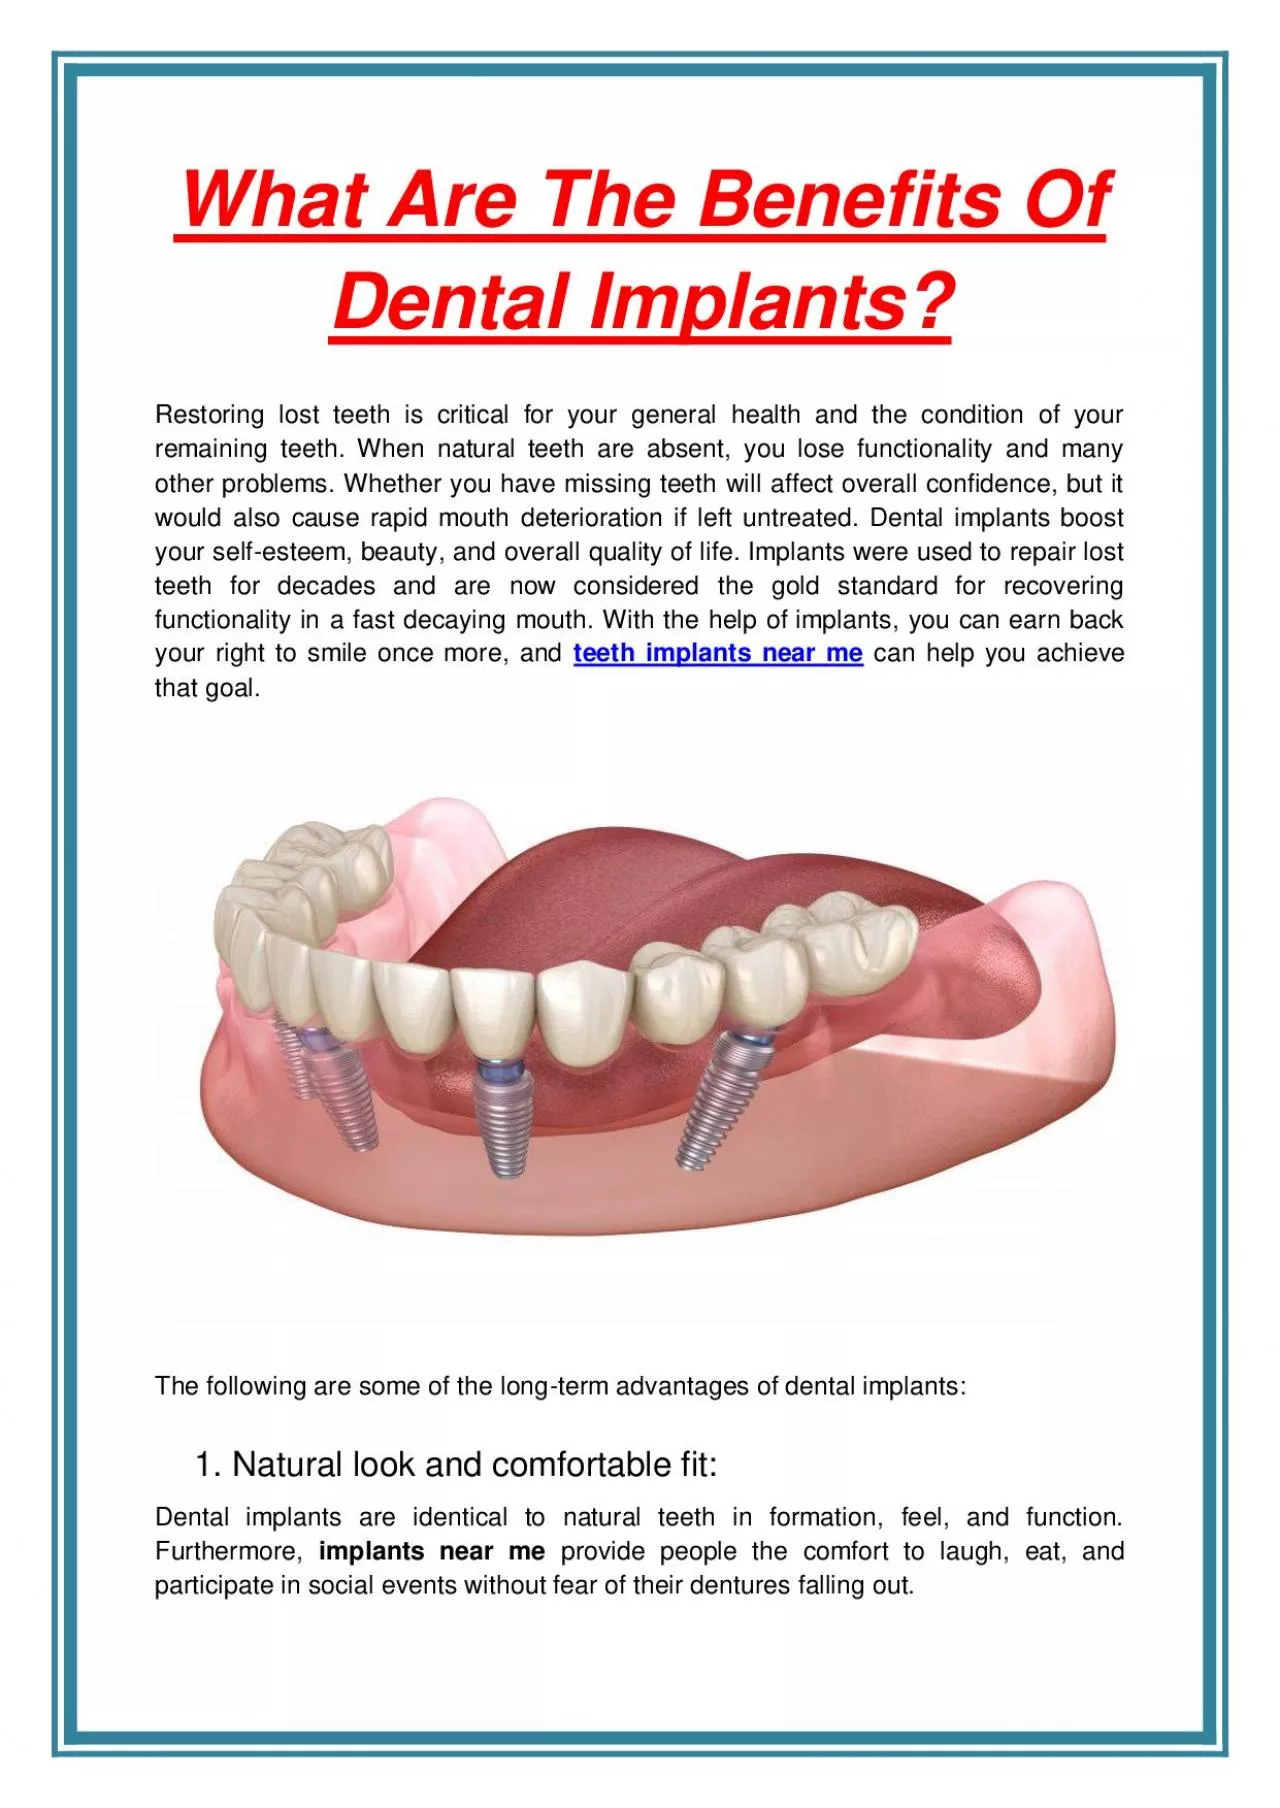 What Are The Benefits Of Dental Implants? 